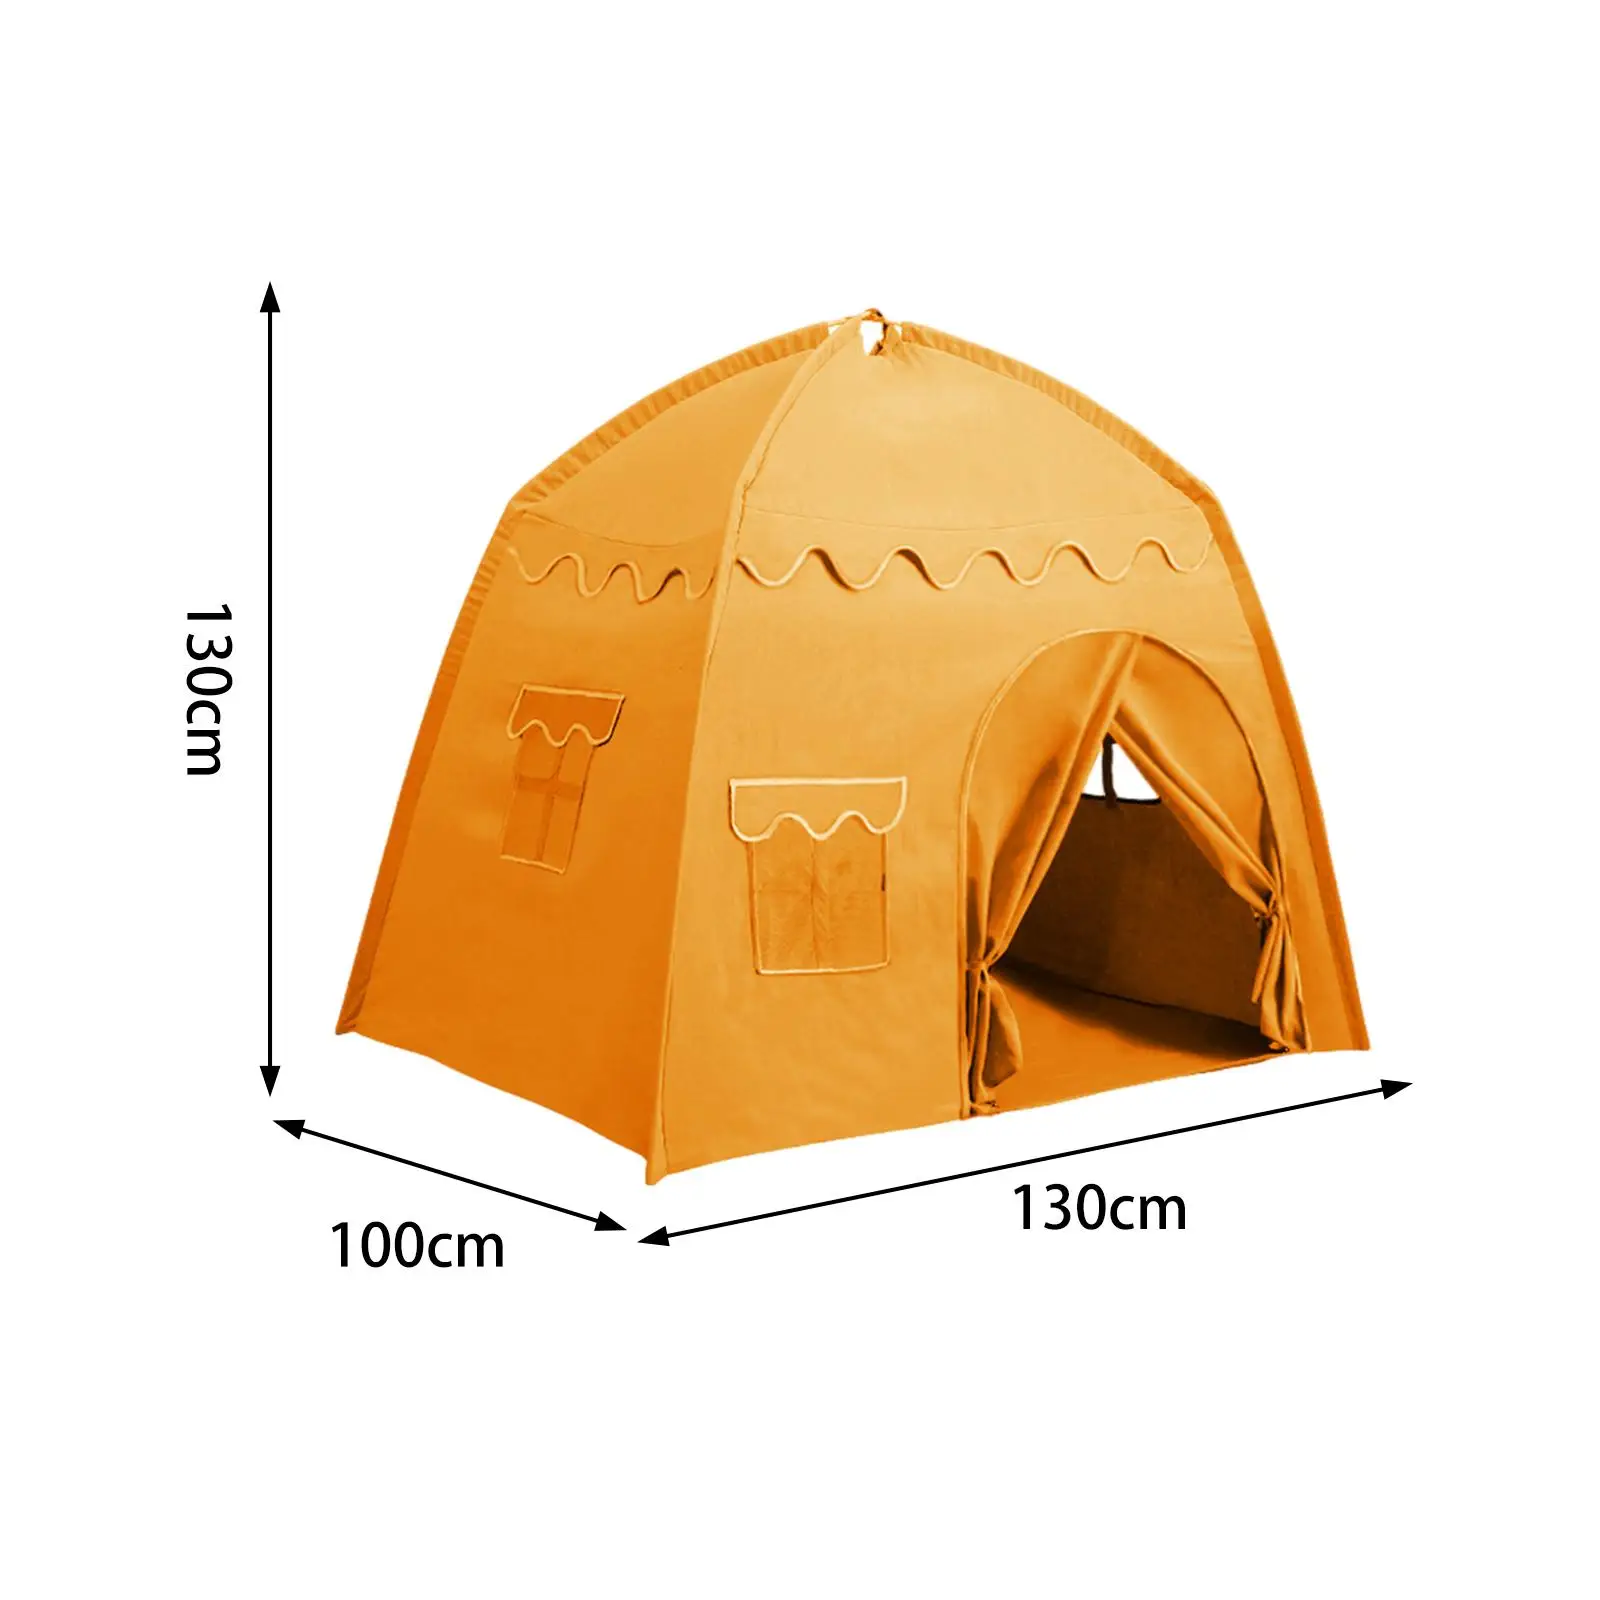 Kids Play Tents Indoor Outdoor Portable Fairy Playhouse Castle Tent Children Play House for Children Toddler Kids Birthday Gift